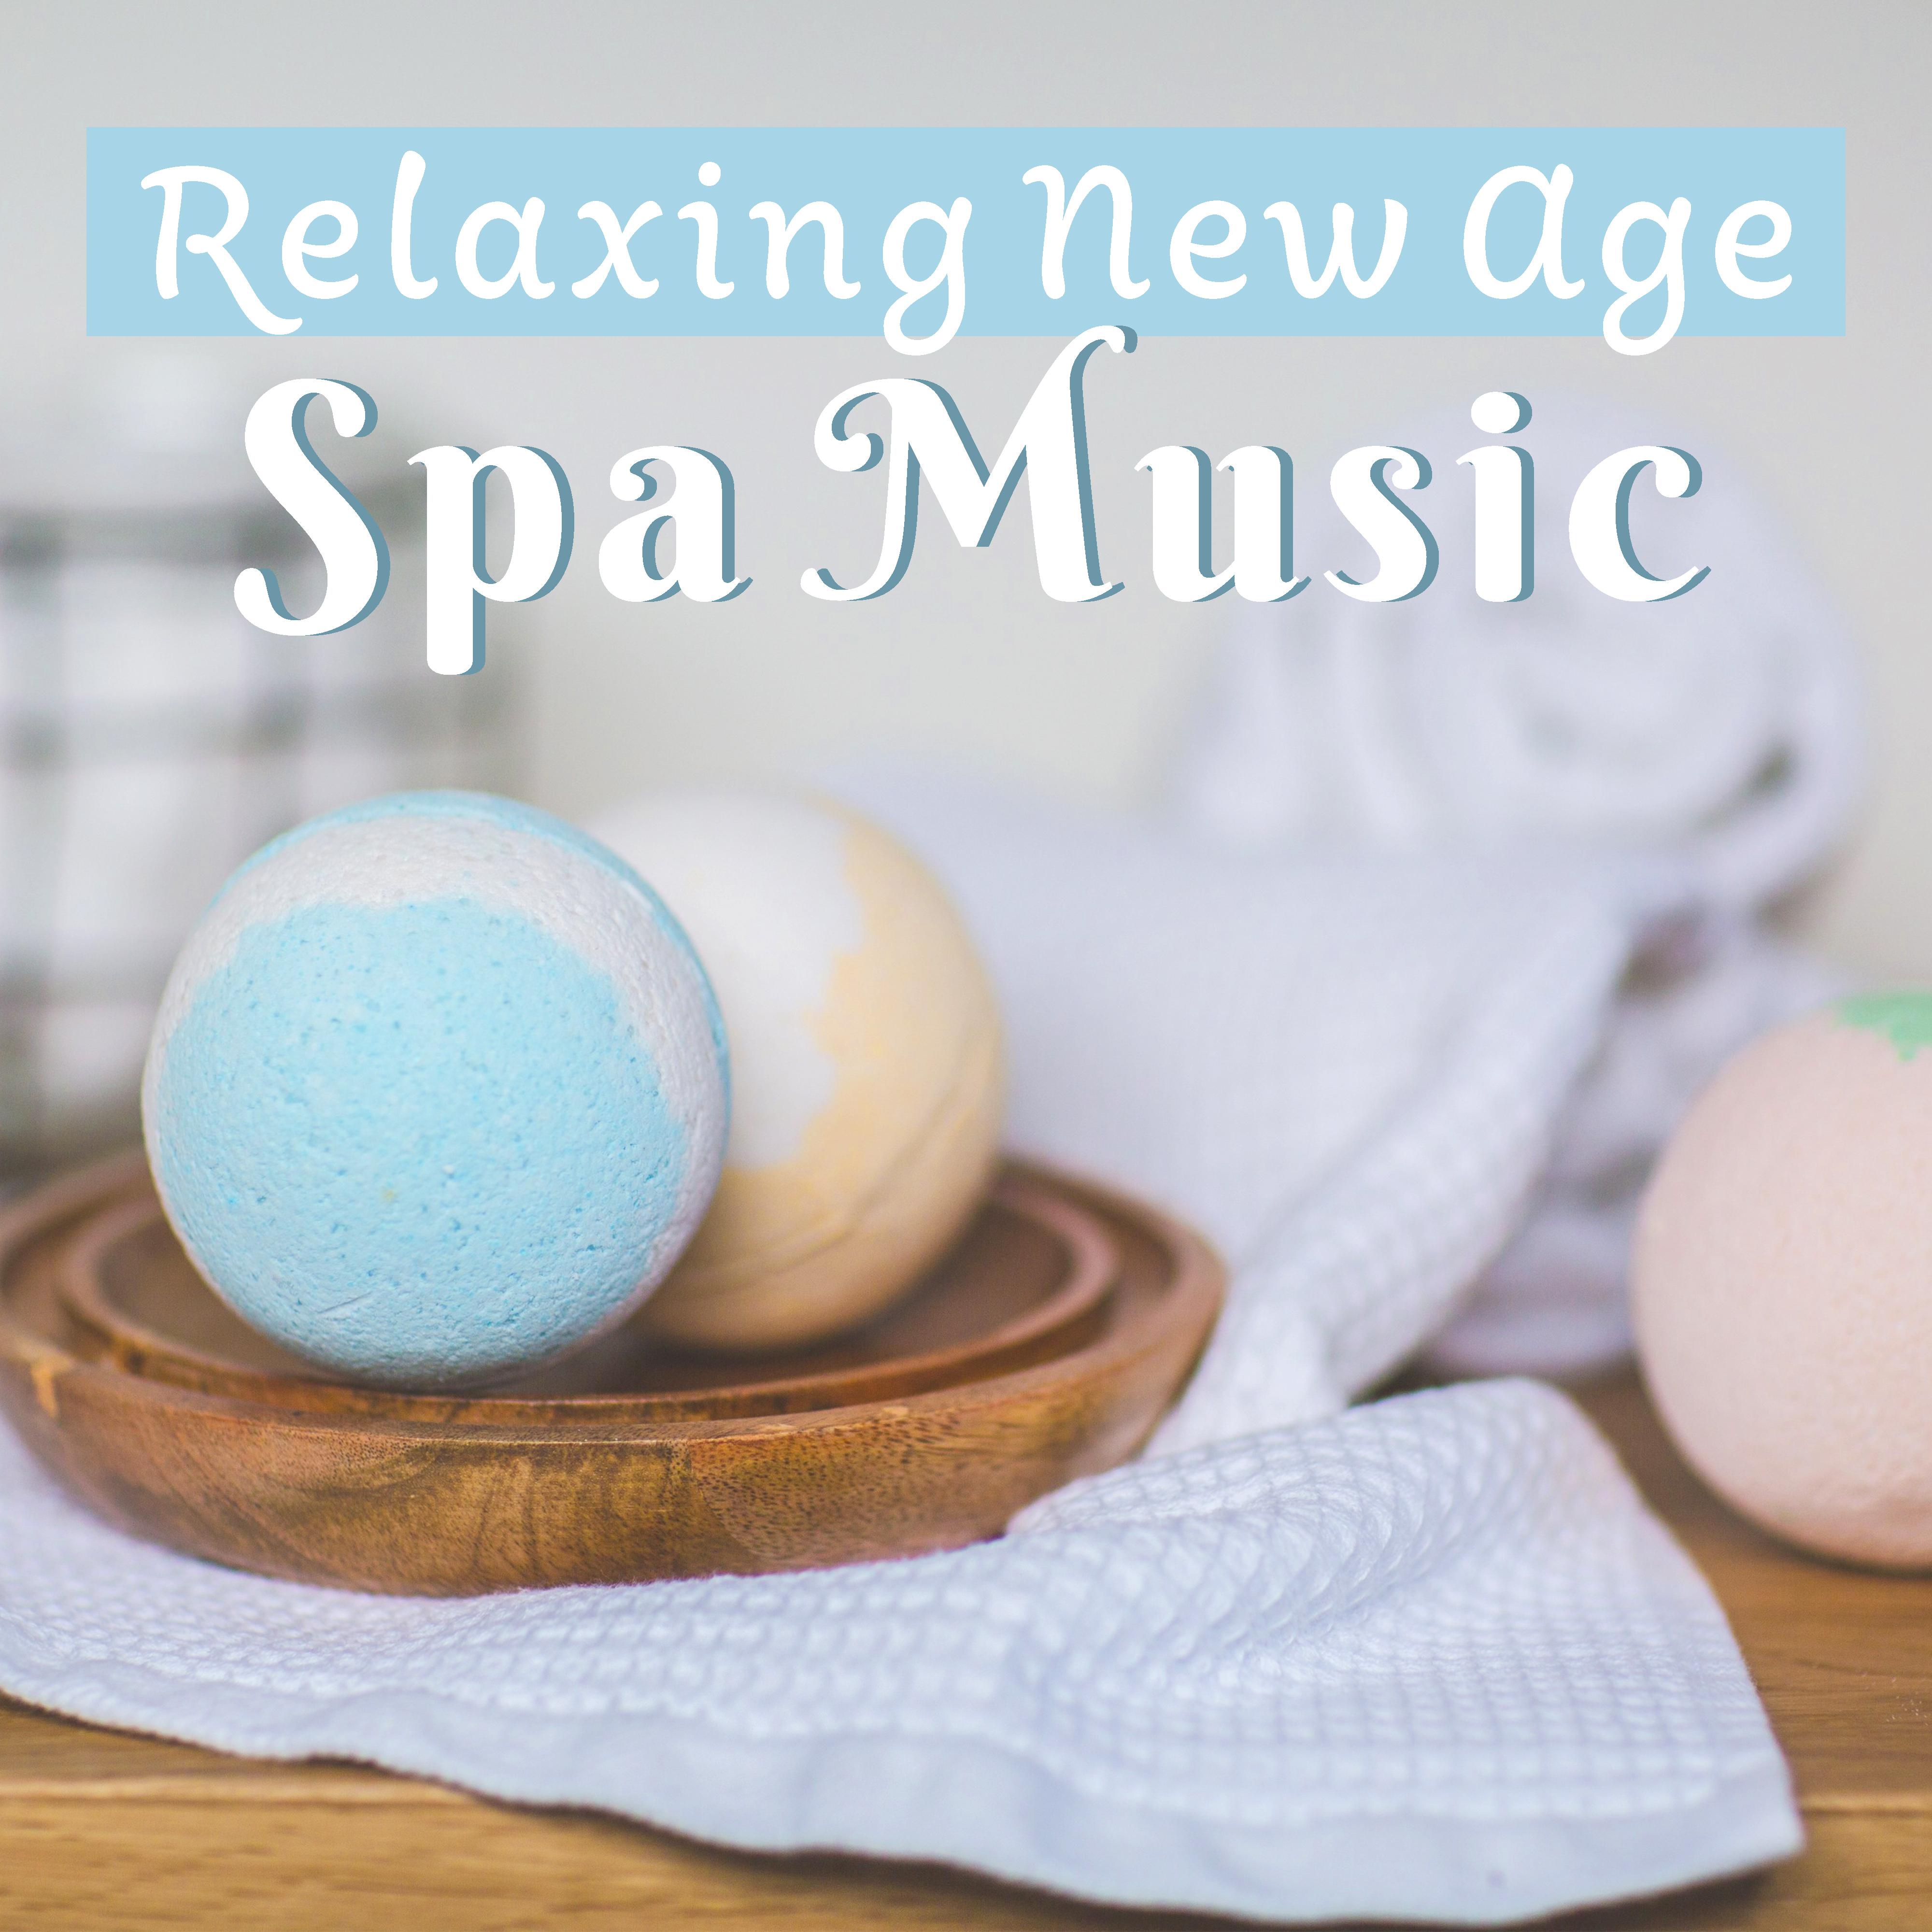 Relaxing New Age Spa Music  Time in Spa, Sounds to Relax, Body Rest, New Age Melodies